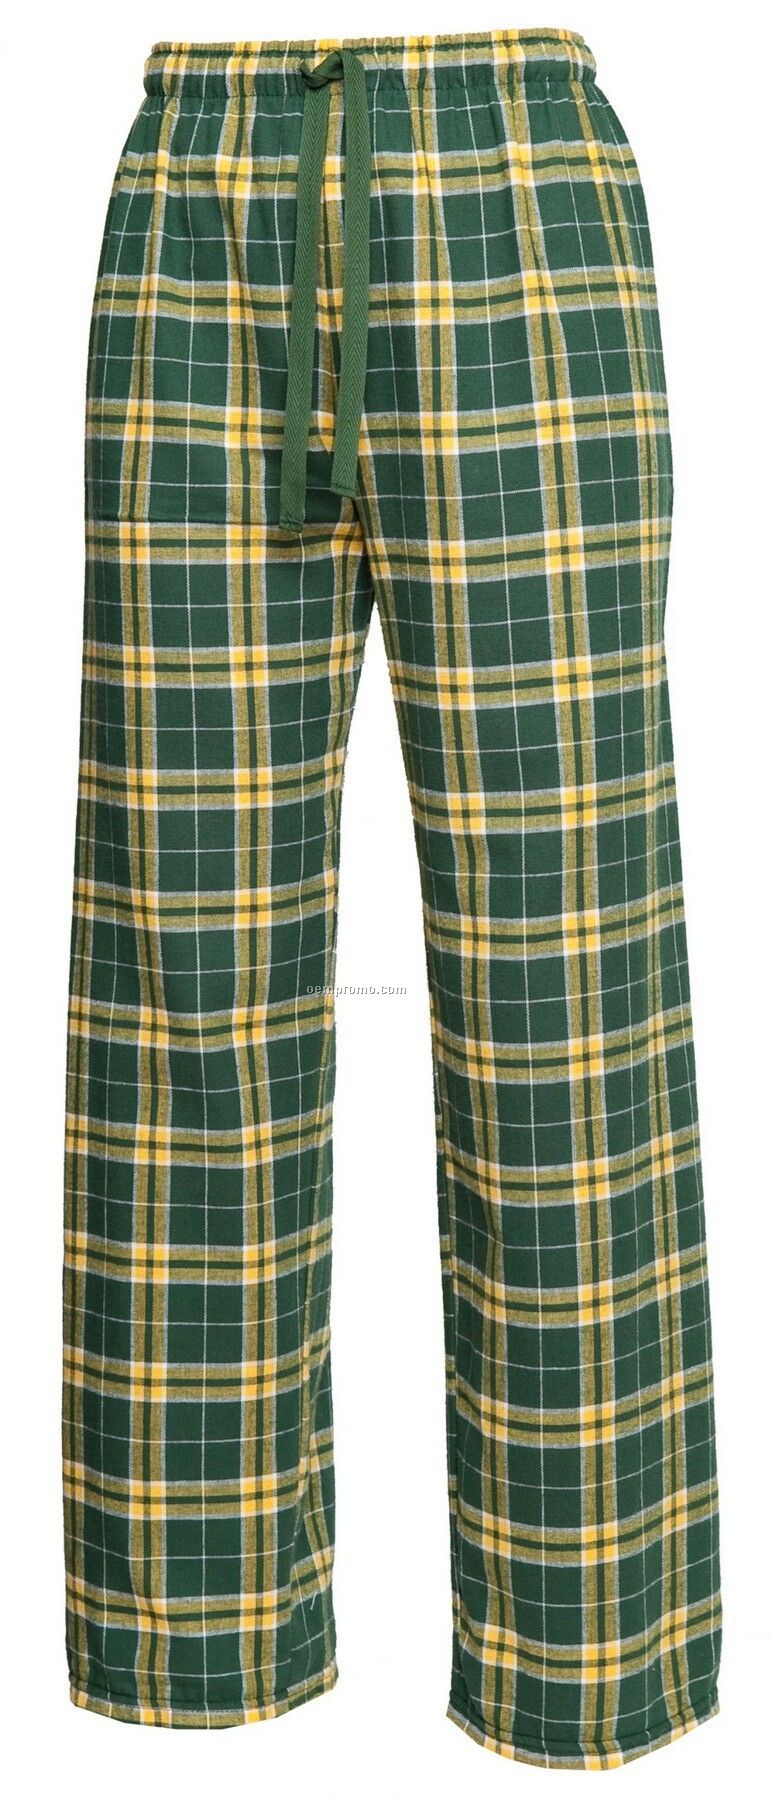 Adult Team Pride Flannel Pant In Green & Gold Plaid